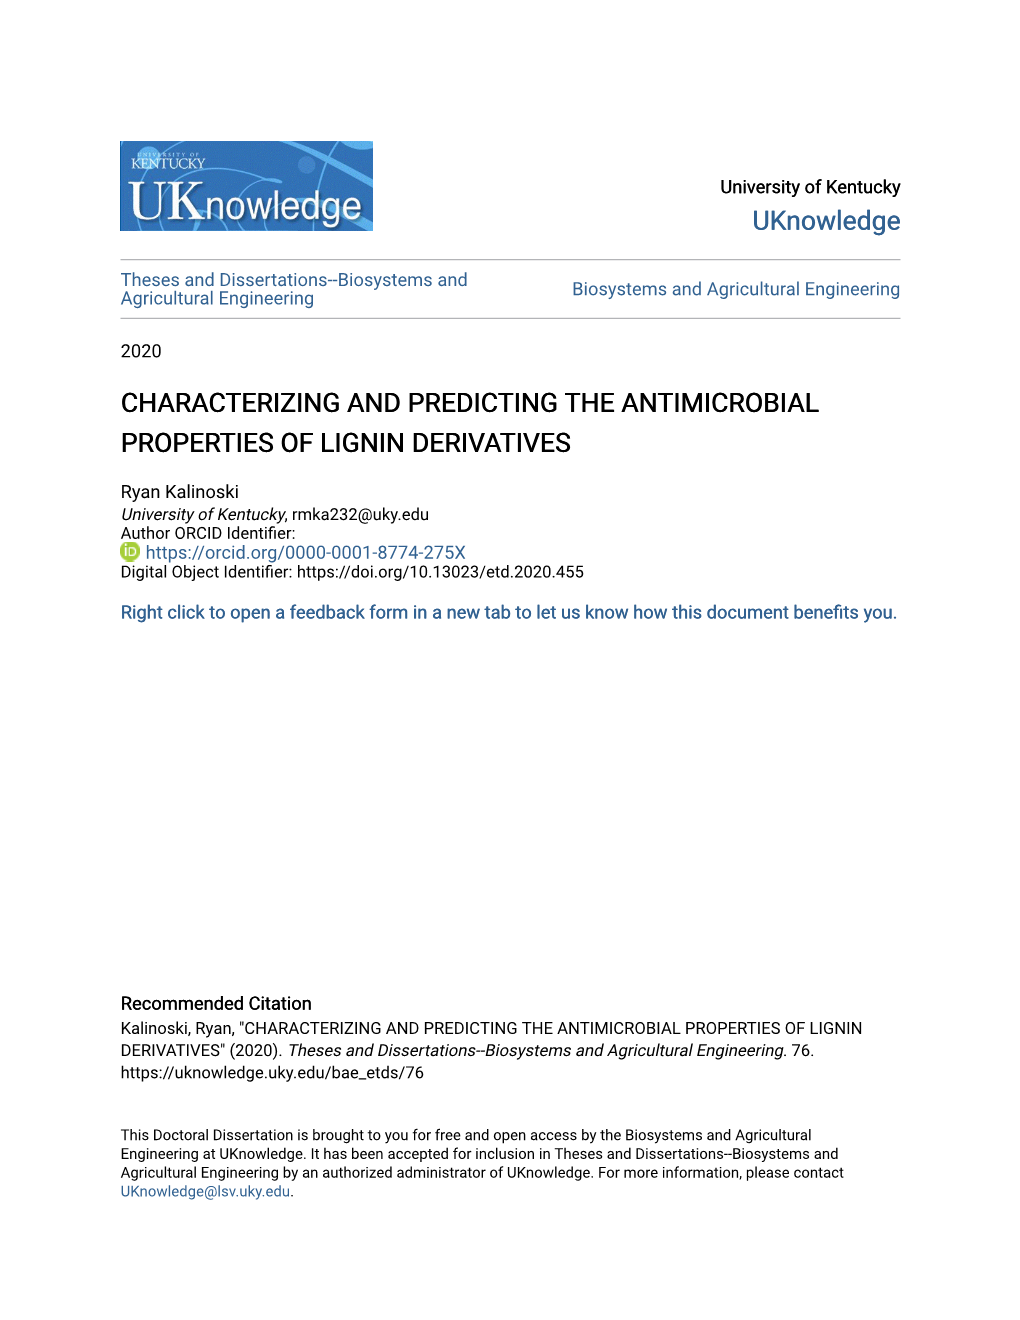 Characterizing and Predicting the Antimicrobial Properties of Lignin Derivatives